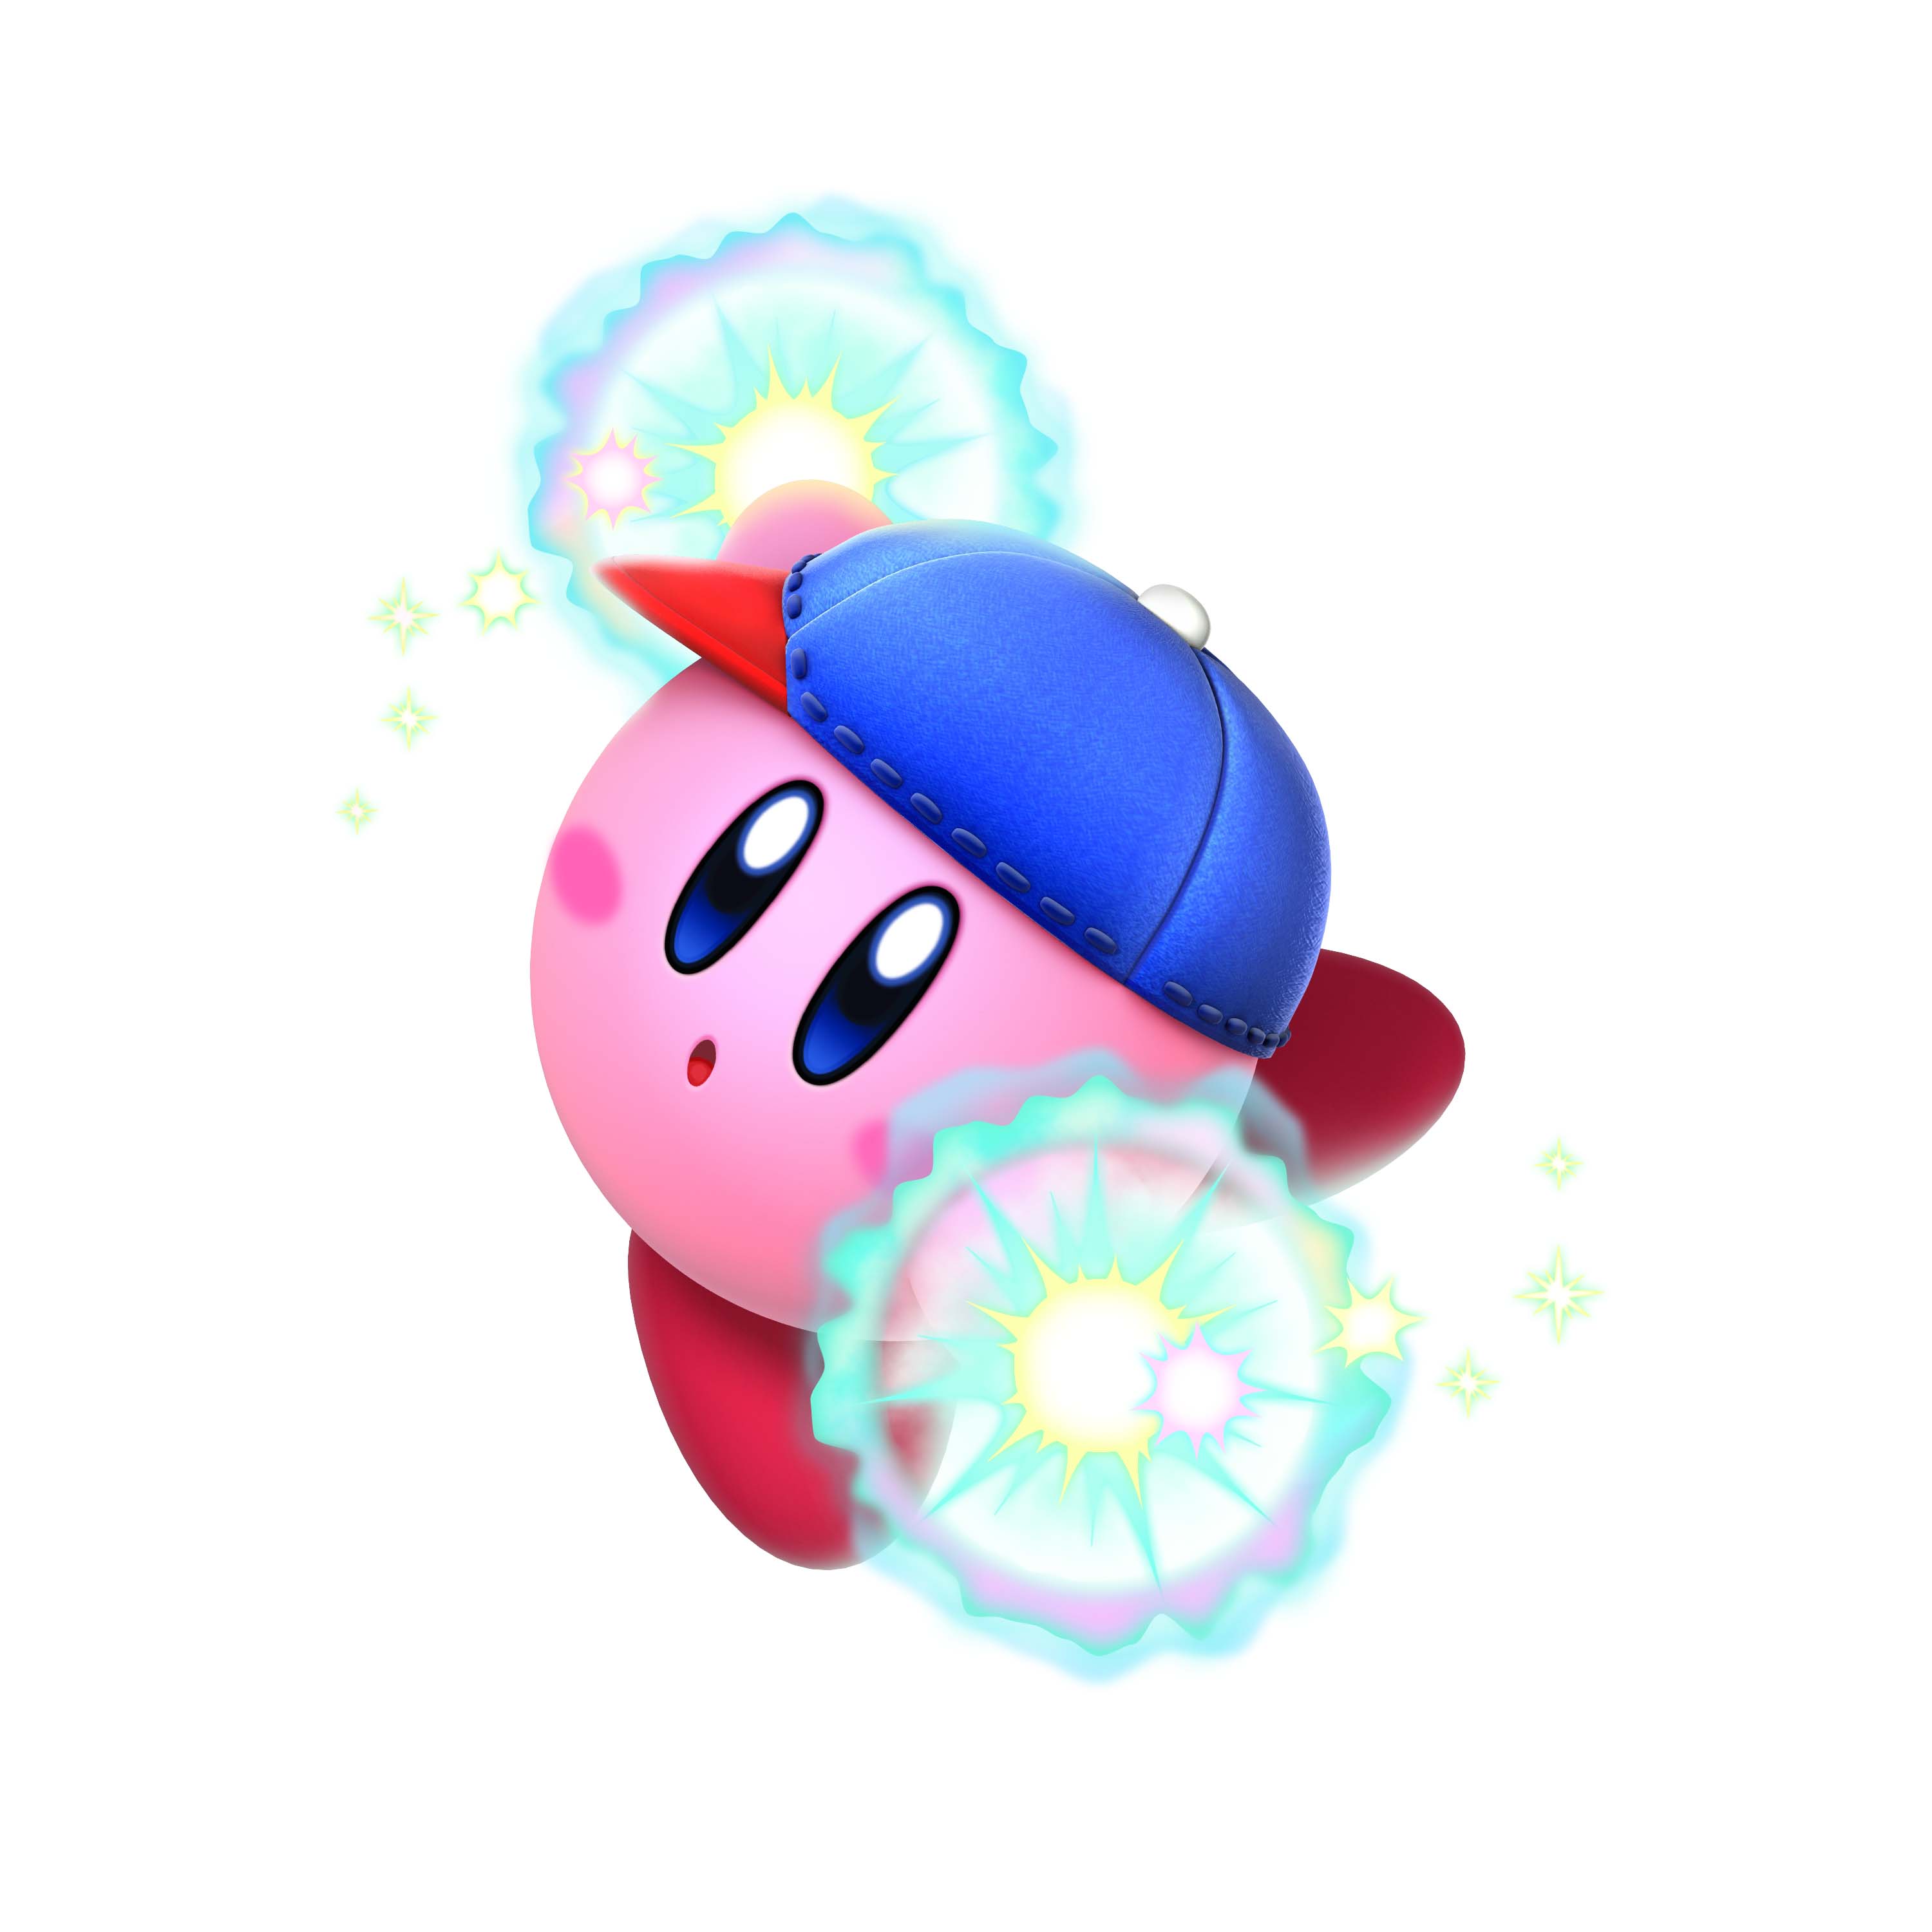 kirby robobot 3ds